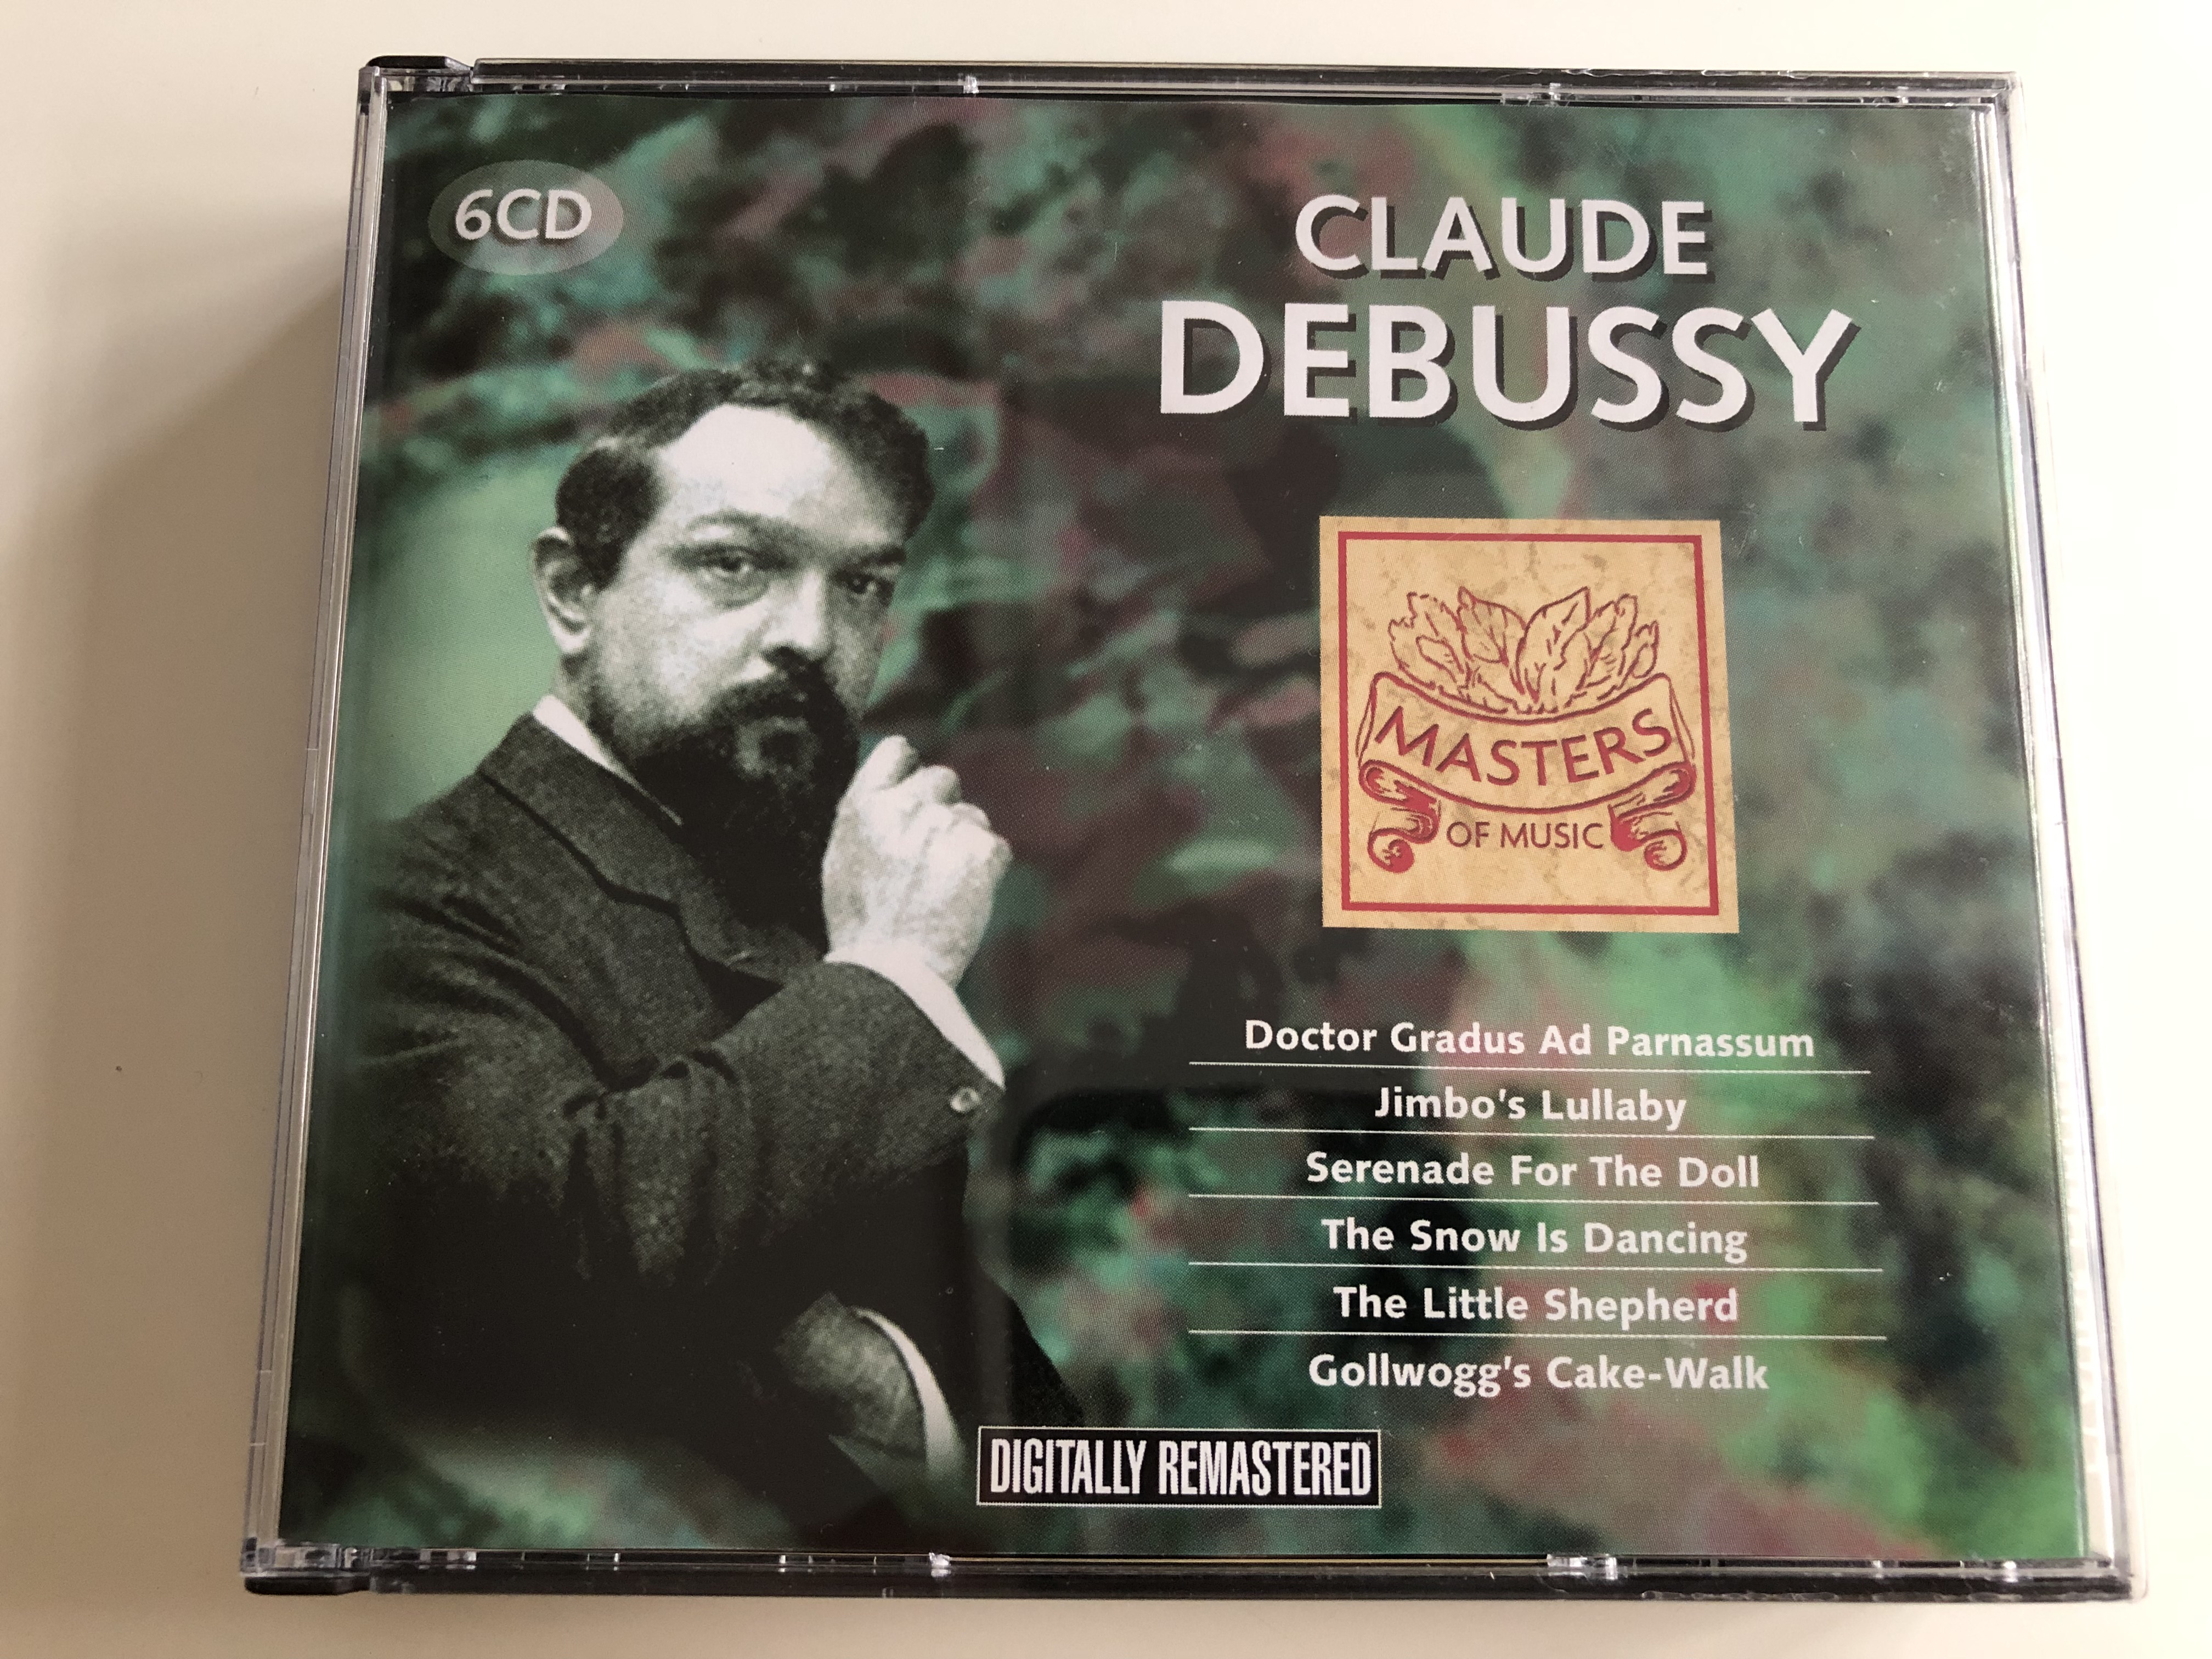 claude-debussy-doctor-gradus-ad-parnassum-jimbo-s-lullaby-serenade-for-the-doll-the-snow-is-dancing-the-little-shepherd-gollwogg-s-cake-walk-6-cd-masters-of-music-mom-611-1-.jpg